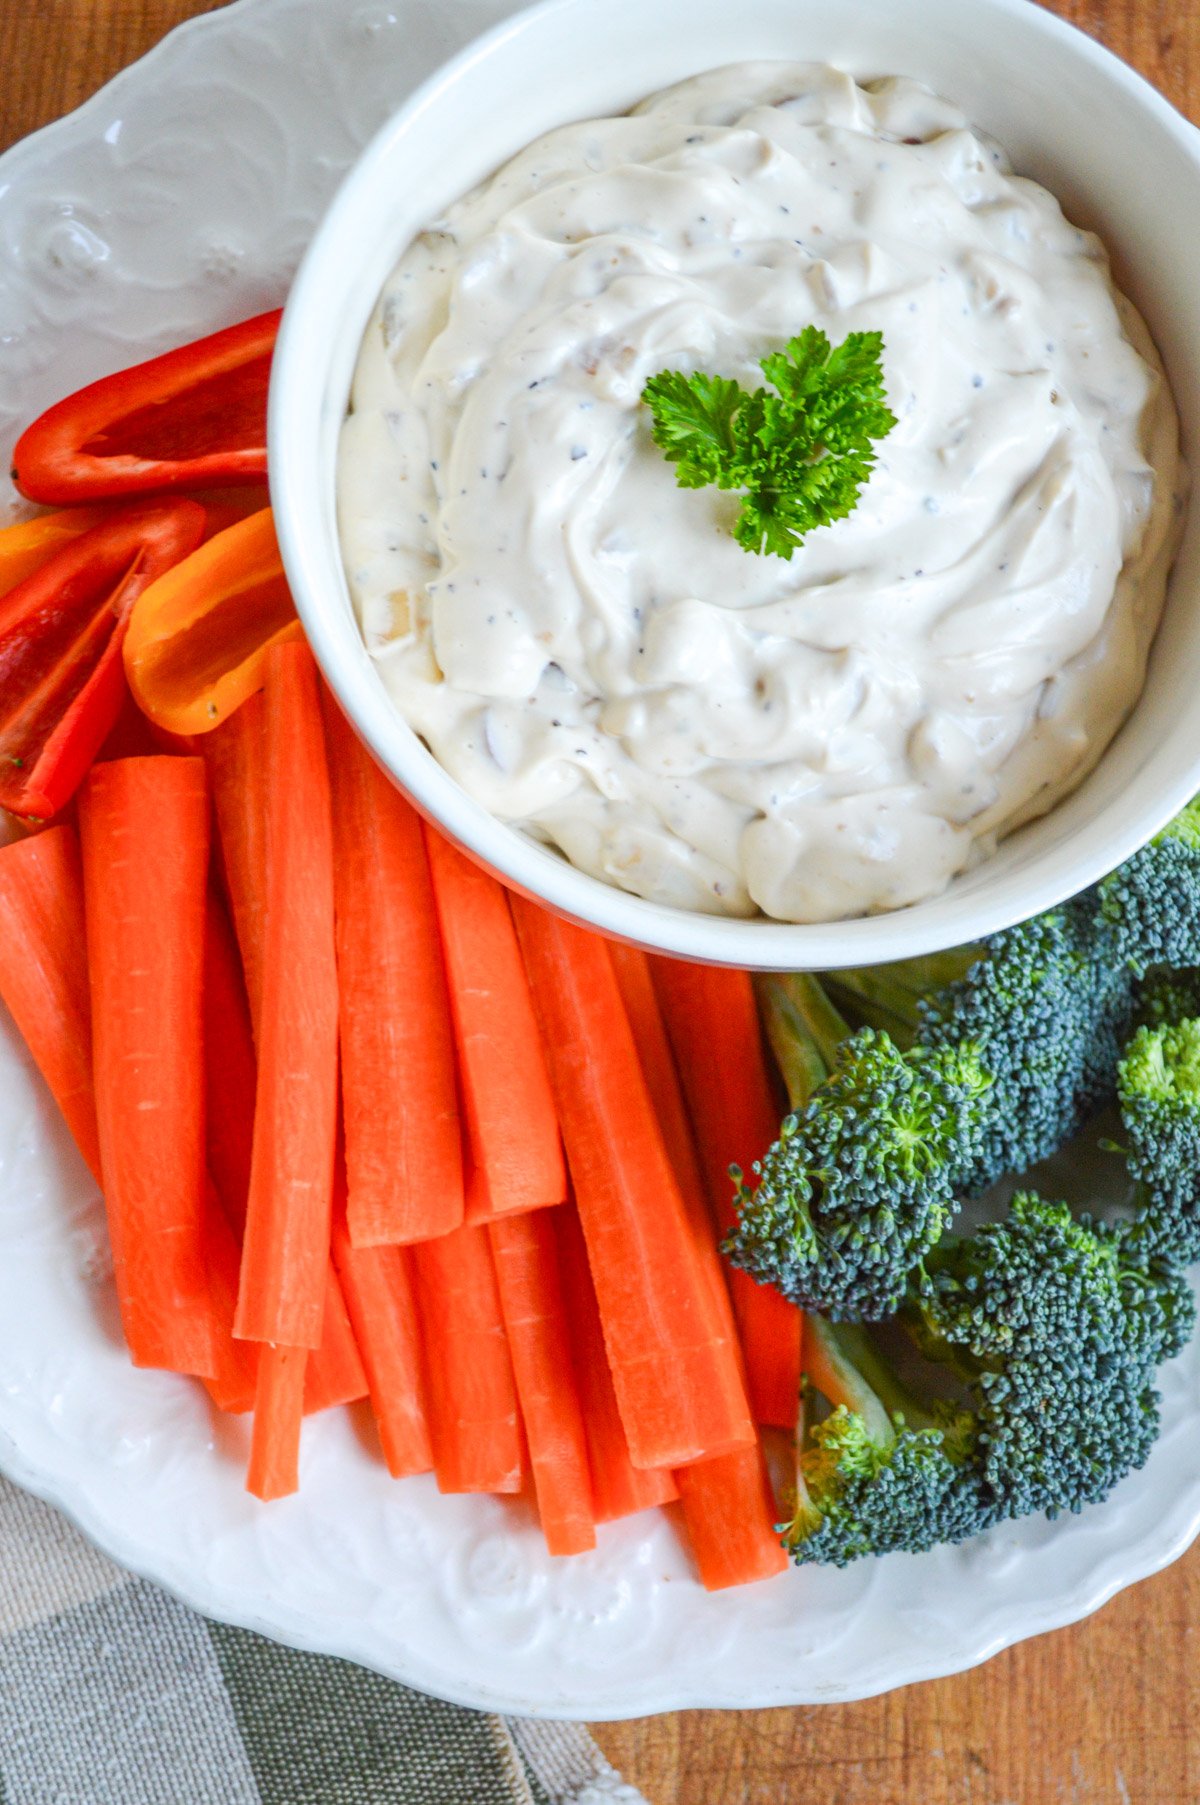 onion dip in white bowl with carrots and broccoli